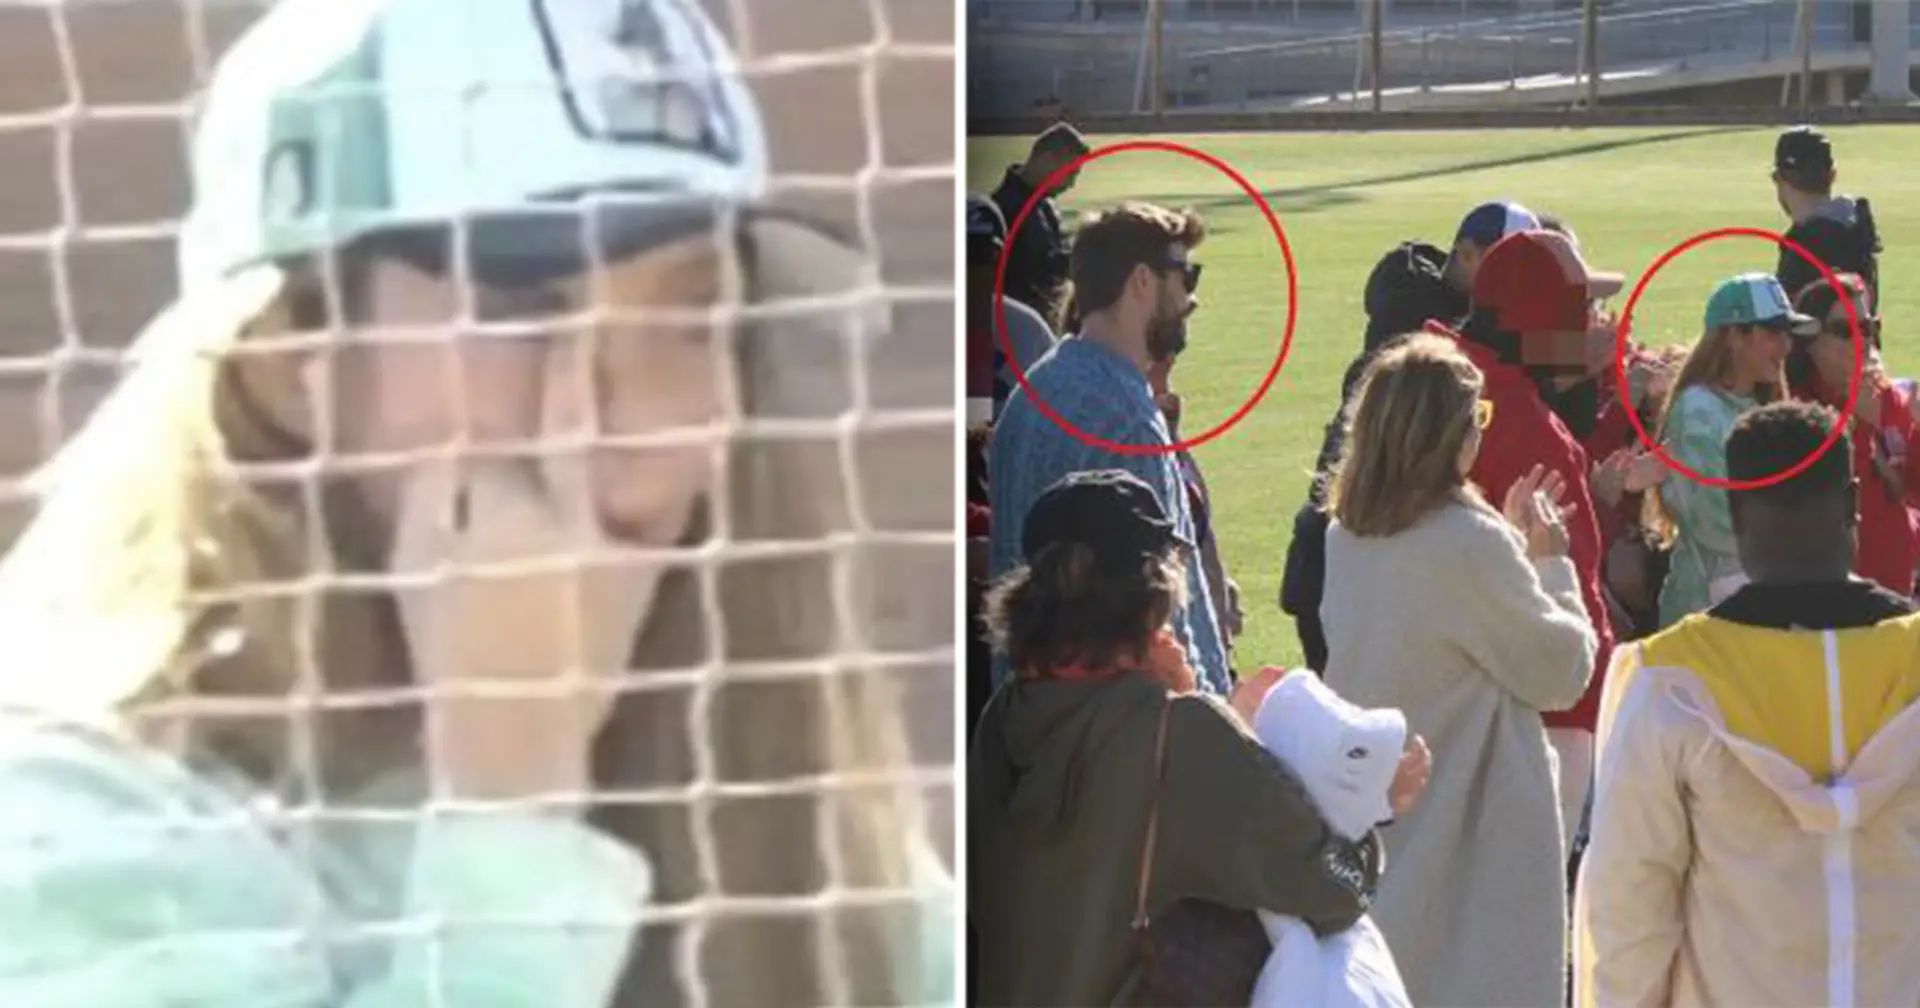 Shakira supposedly shows Pique middle finger during baseball game